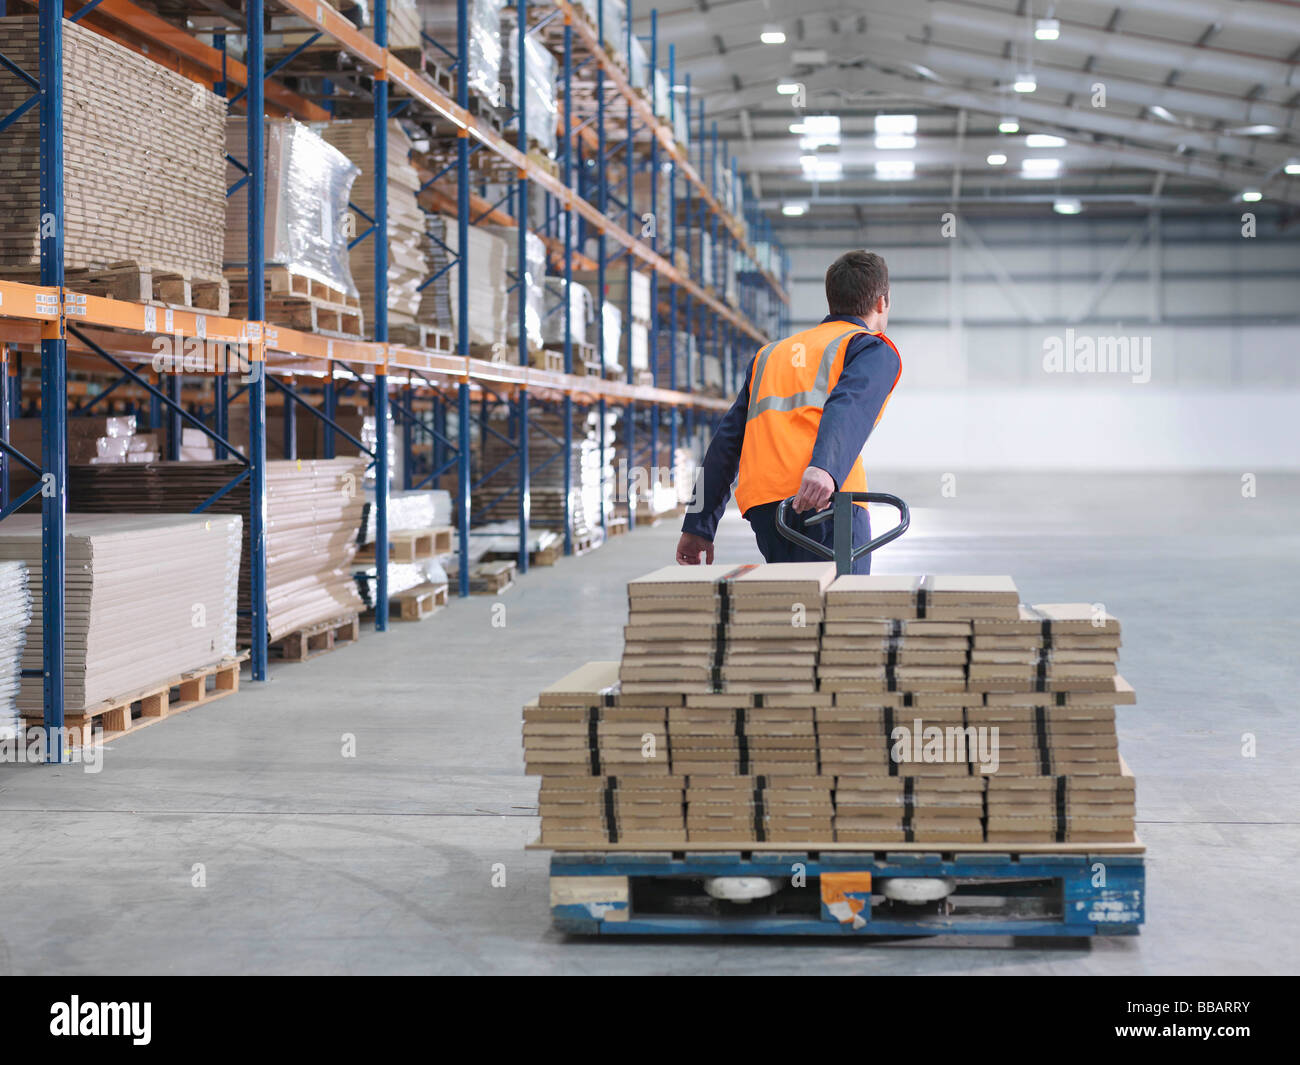 Worker Transporting Load In Warehouse Stock Photo